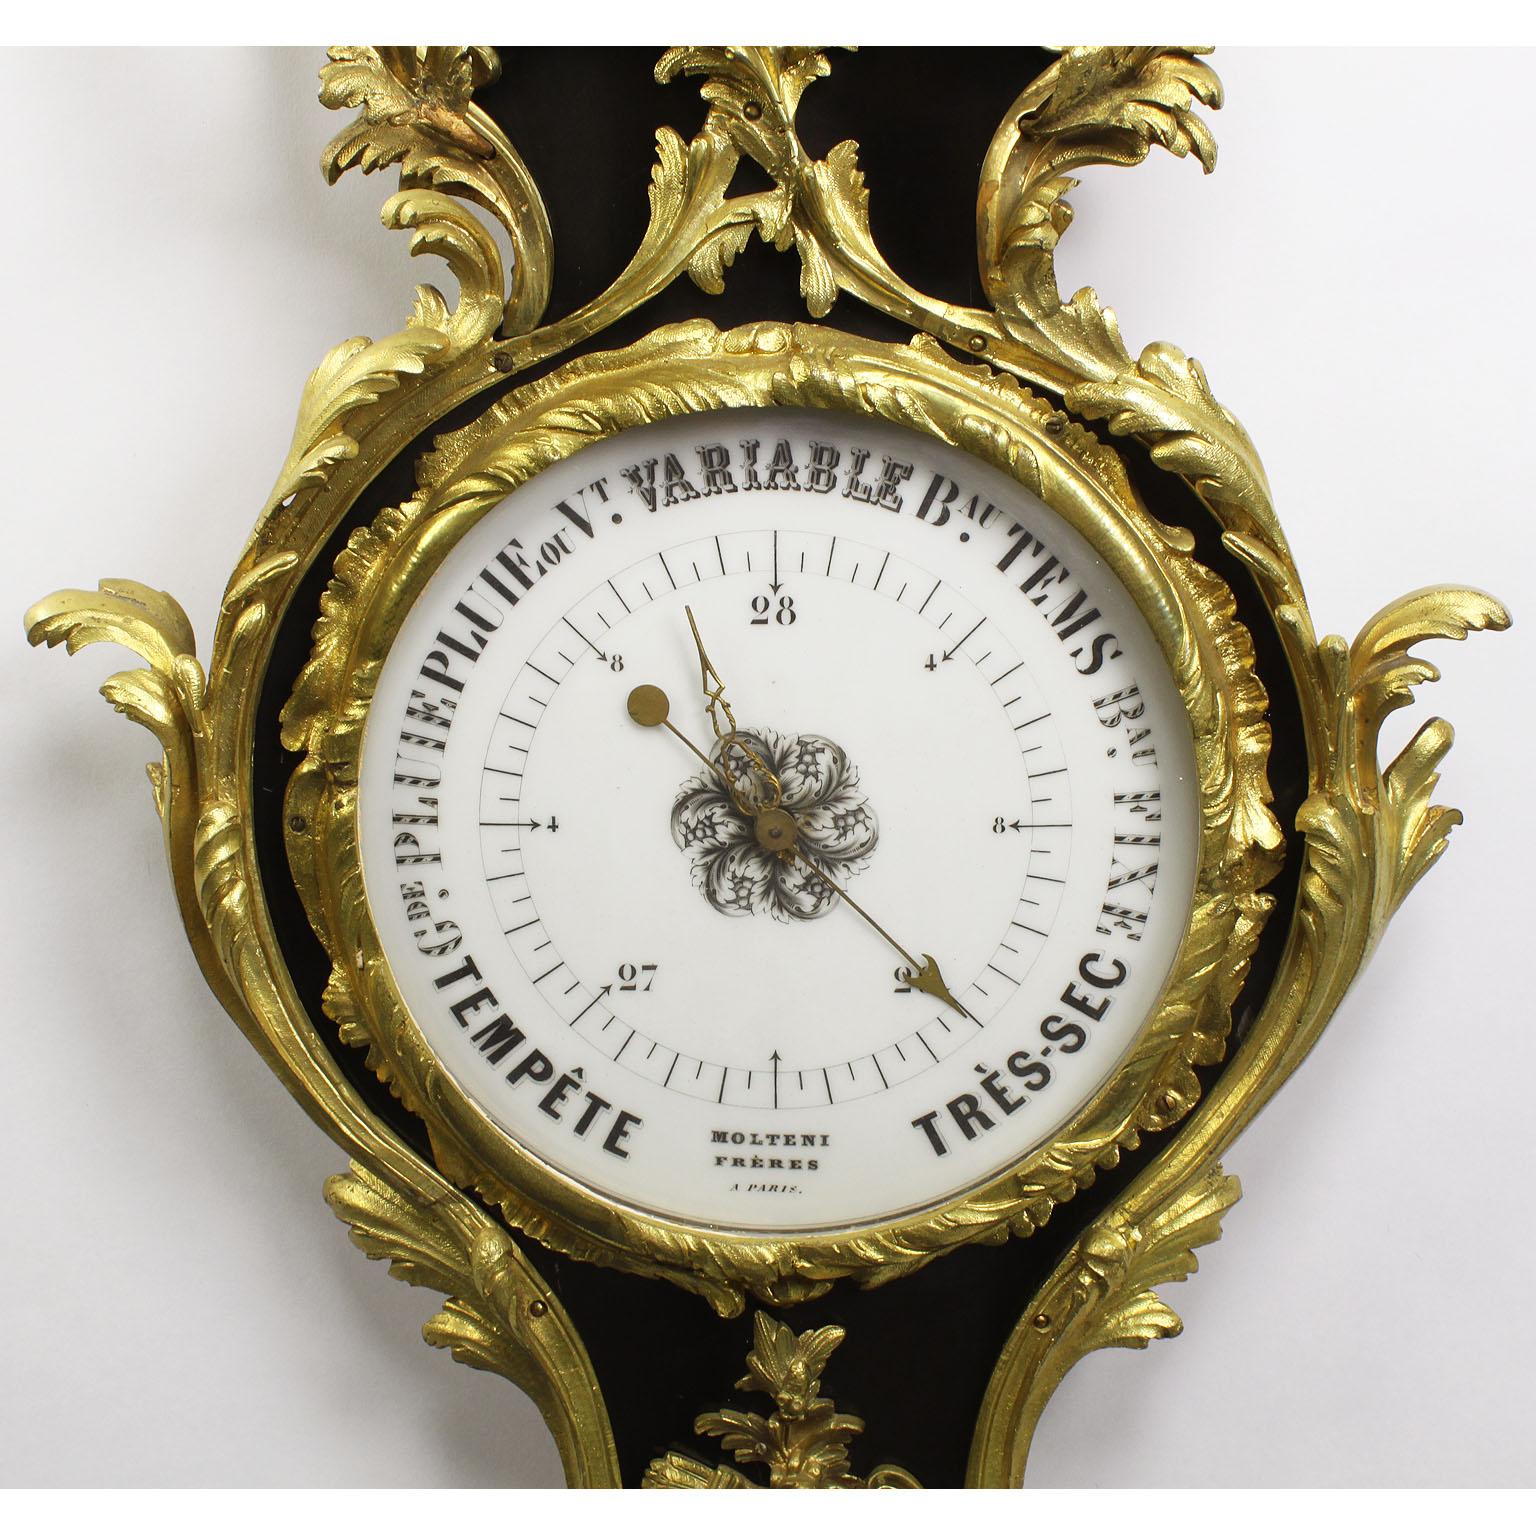 A fine French 19th century Louis XV style gilt-bronze and ebonized wood wall-mounting barometer - thermometer by Molteni Frères. The elongated ebonized body surmounted with gilt-bronze ornaments depicting scrolls, acanthus and floral bouquets with